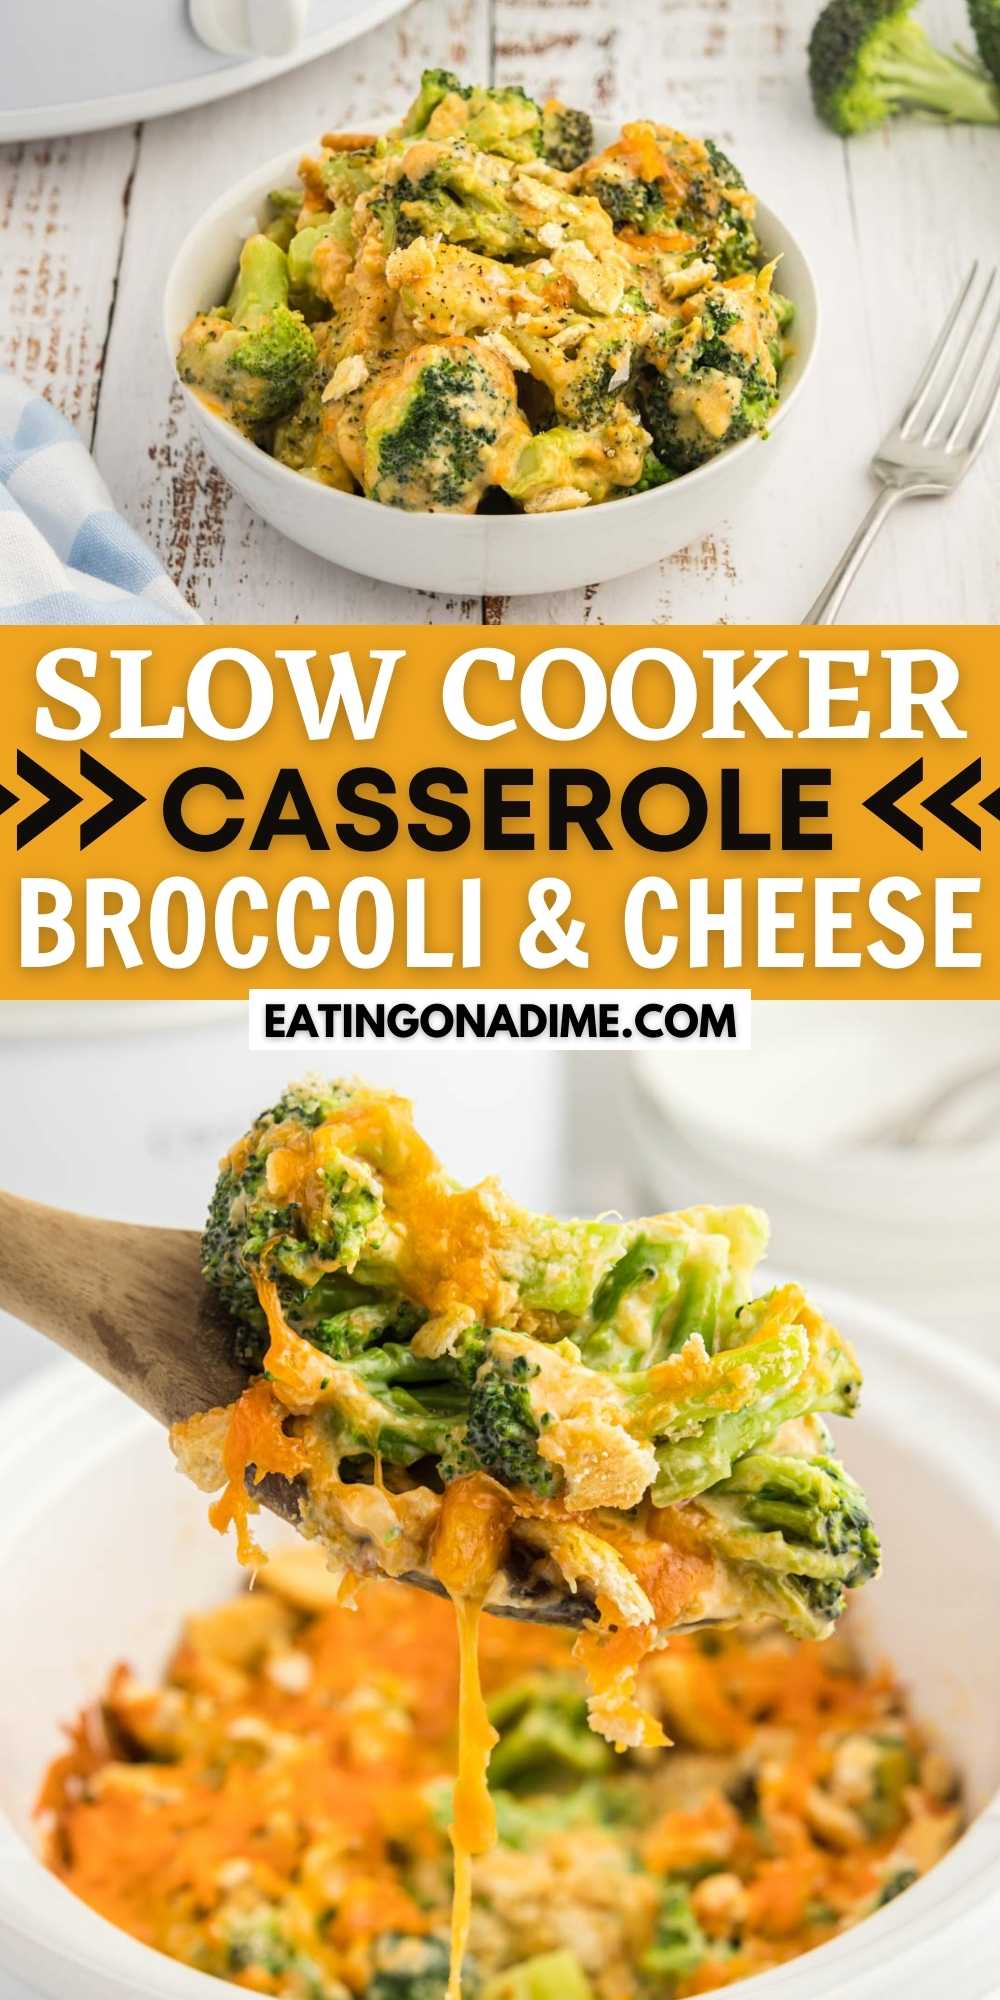 Crockpot Broccoli Cheese Casserole can easily be served as a main dish or a side dish. This casserole is easy to make, creamy and very cheesy. Easy slow cooker side dish recipe. #eatingonadime #broccolicheese #casserolerecipe